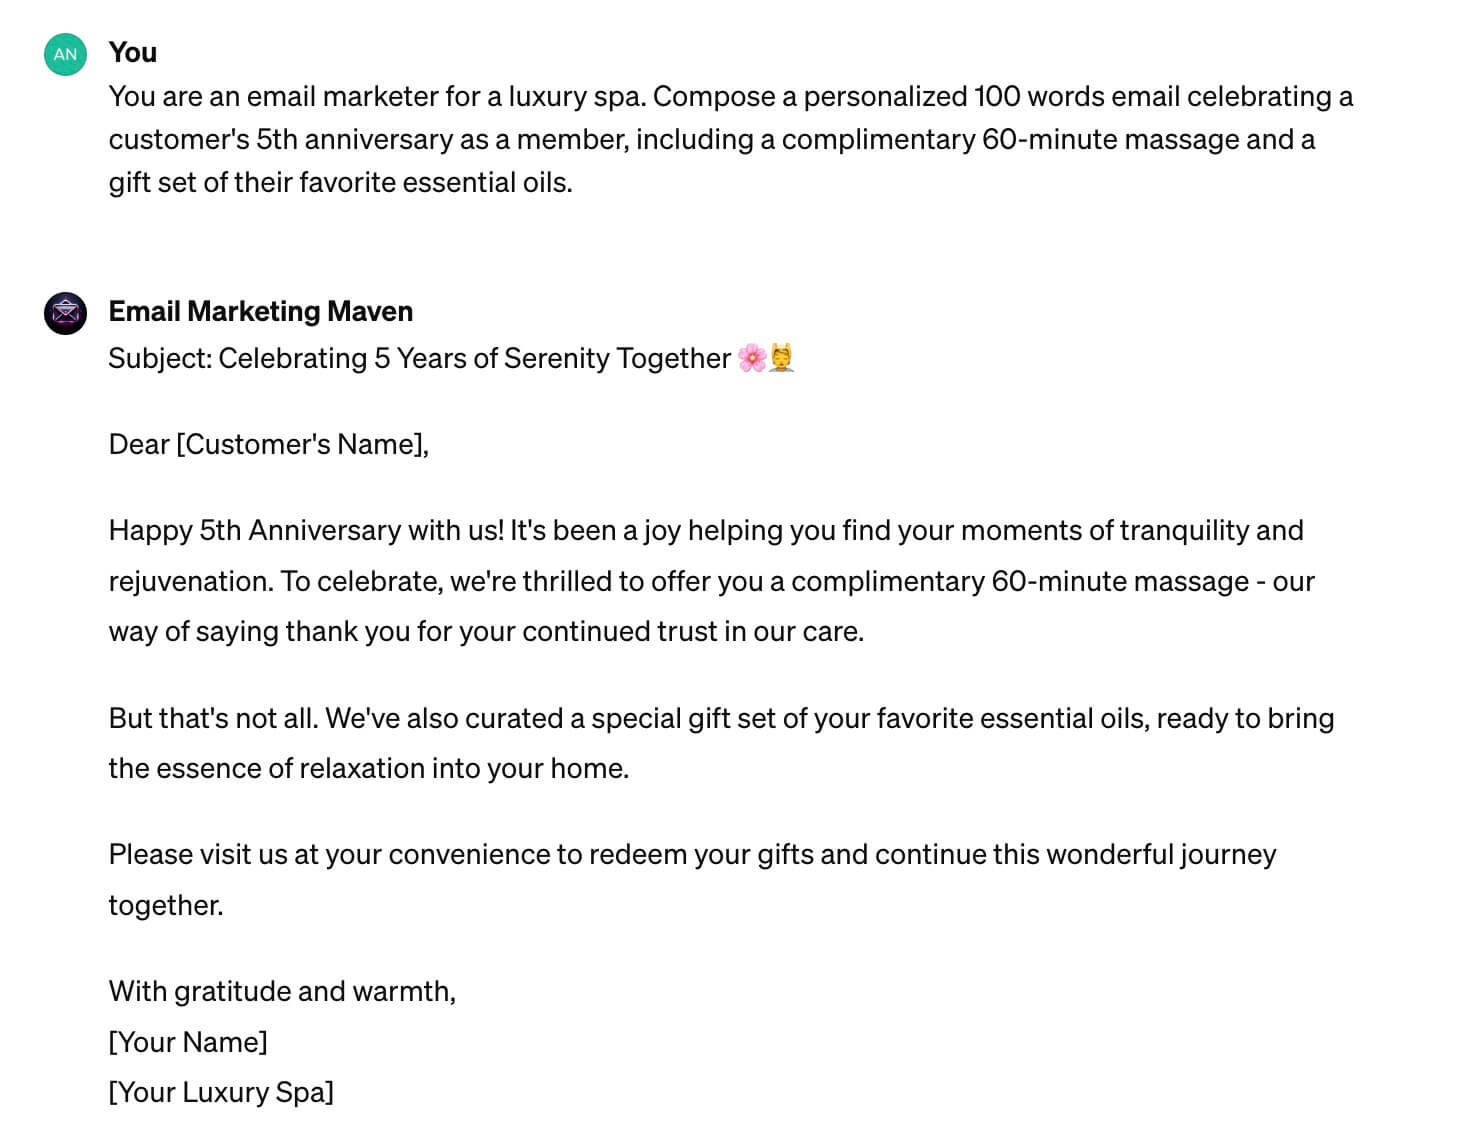 Example of an email prompt to compose a personalized anniversary celebration message for a luxury spa member